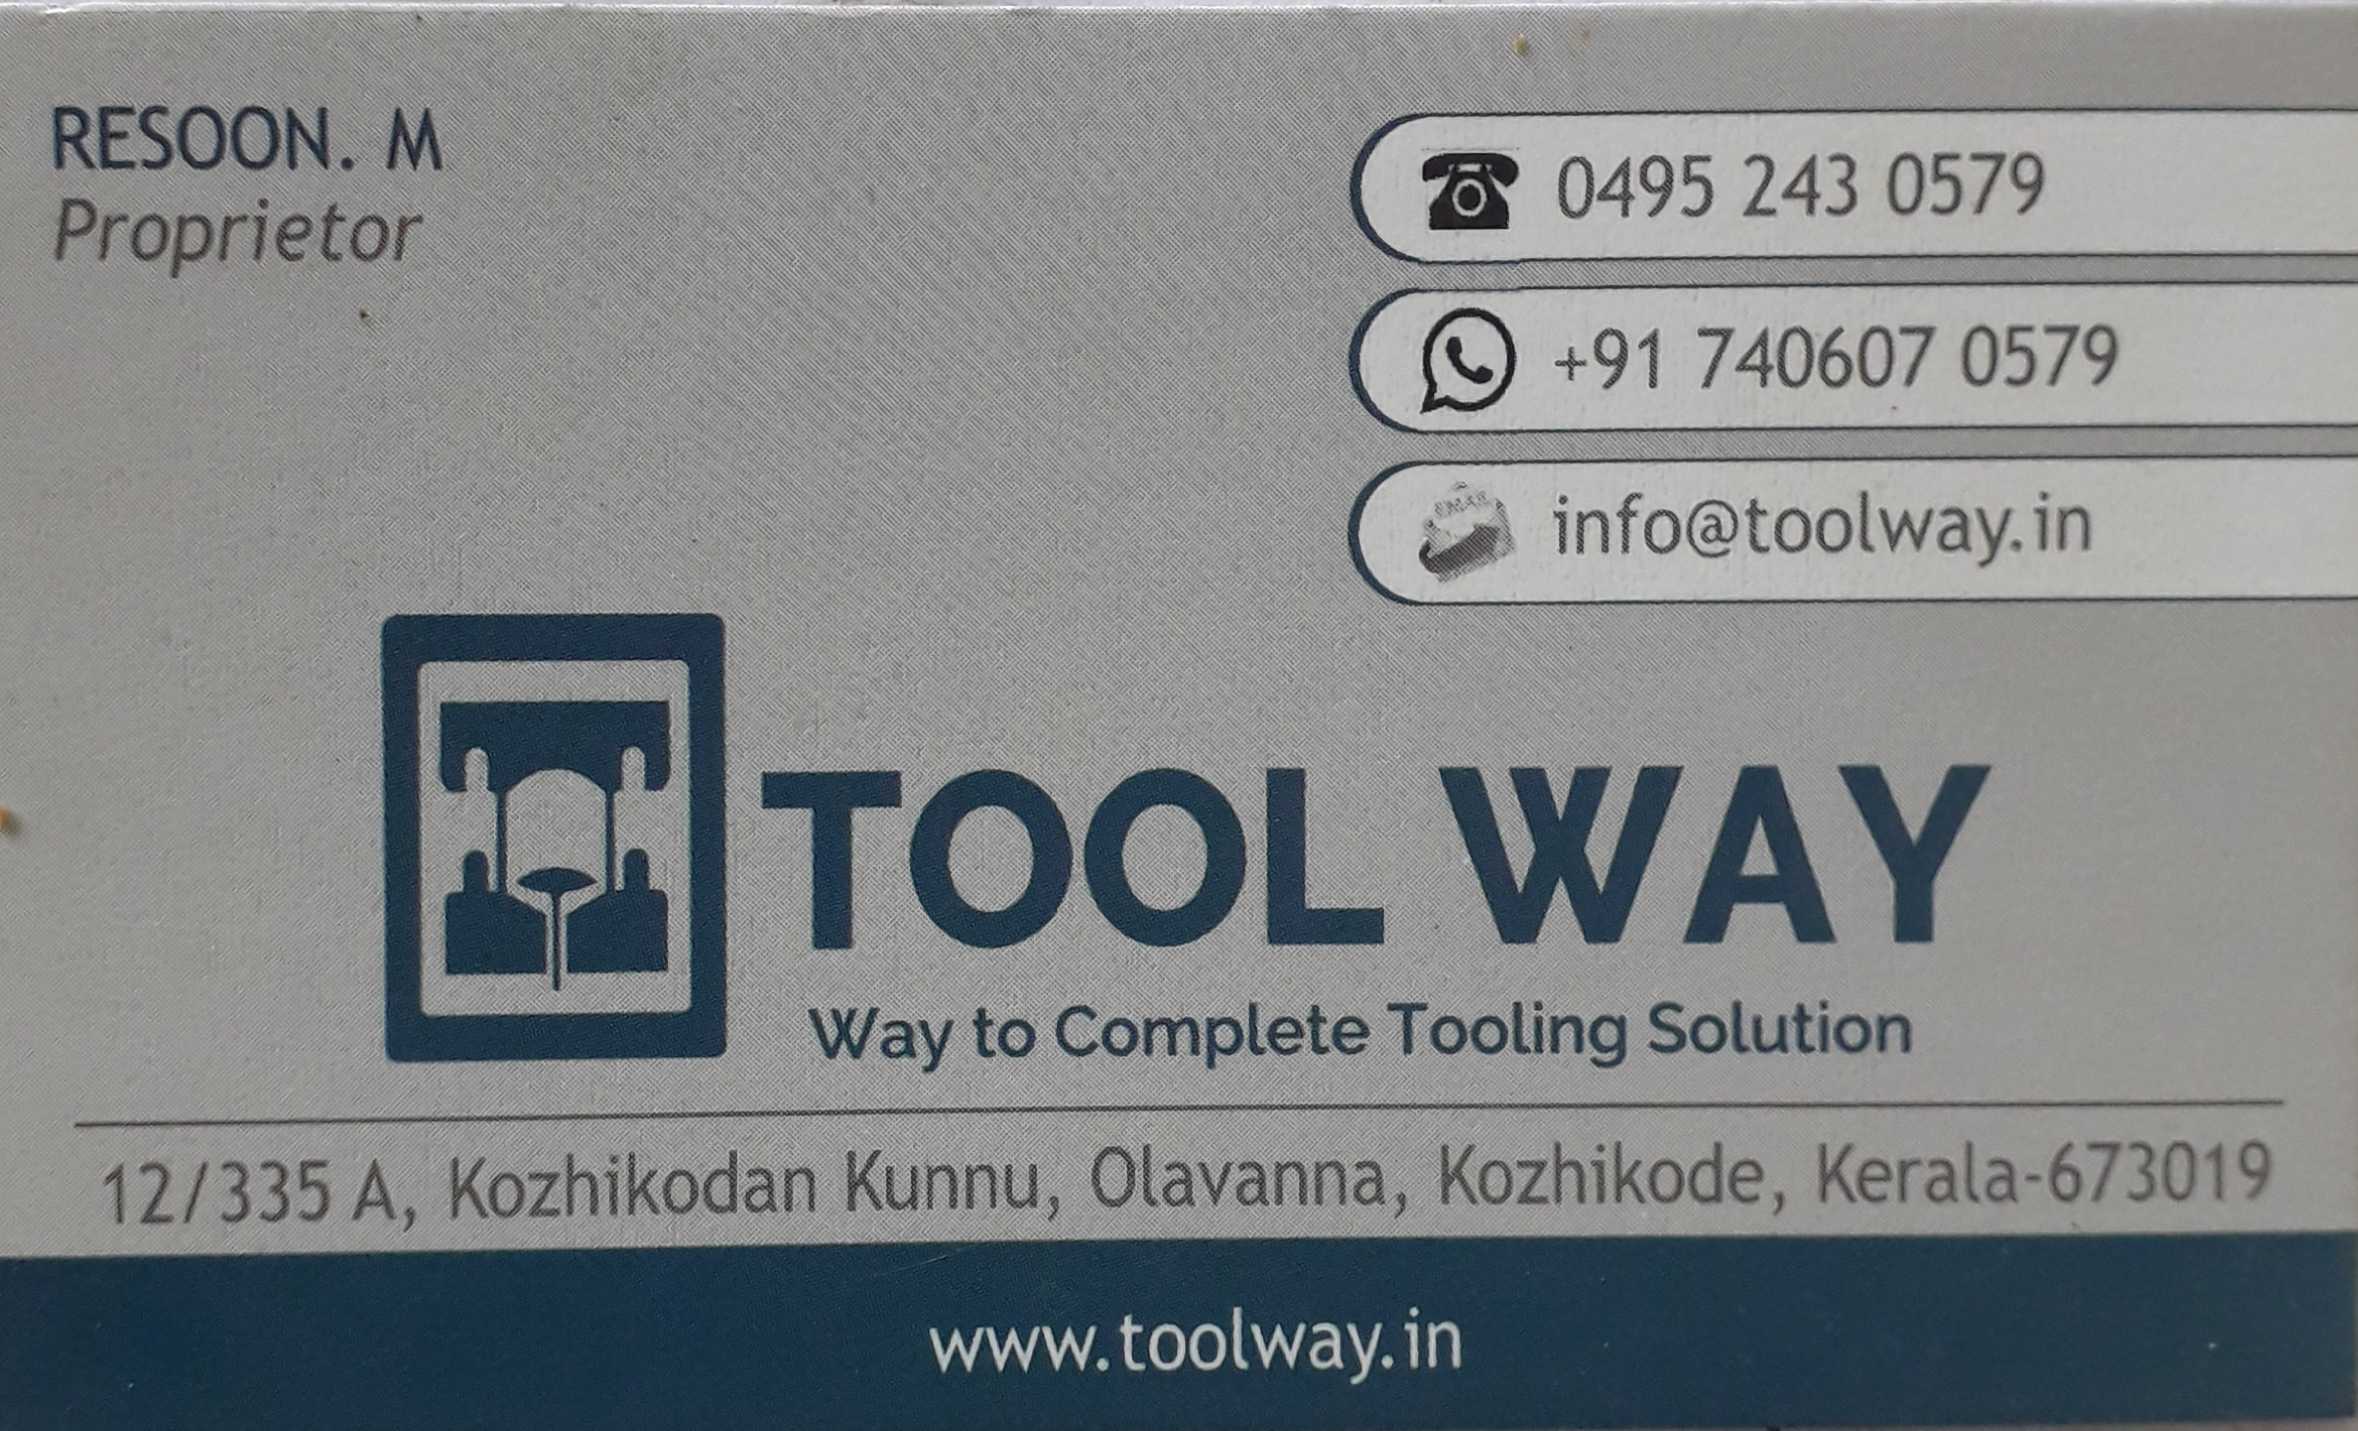 TOOLWAY Way to Complete Tooling Solution, TOOLS,  service in Farook, Kozhikode